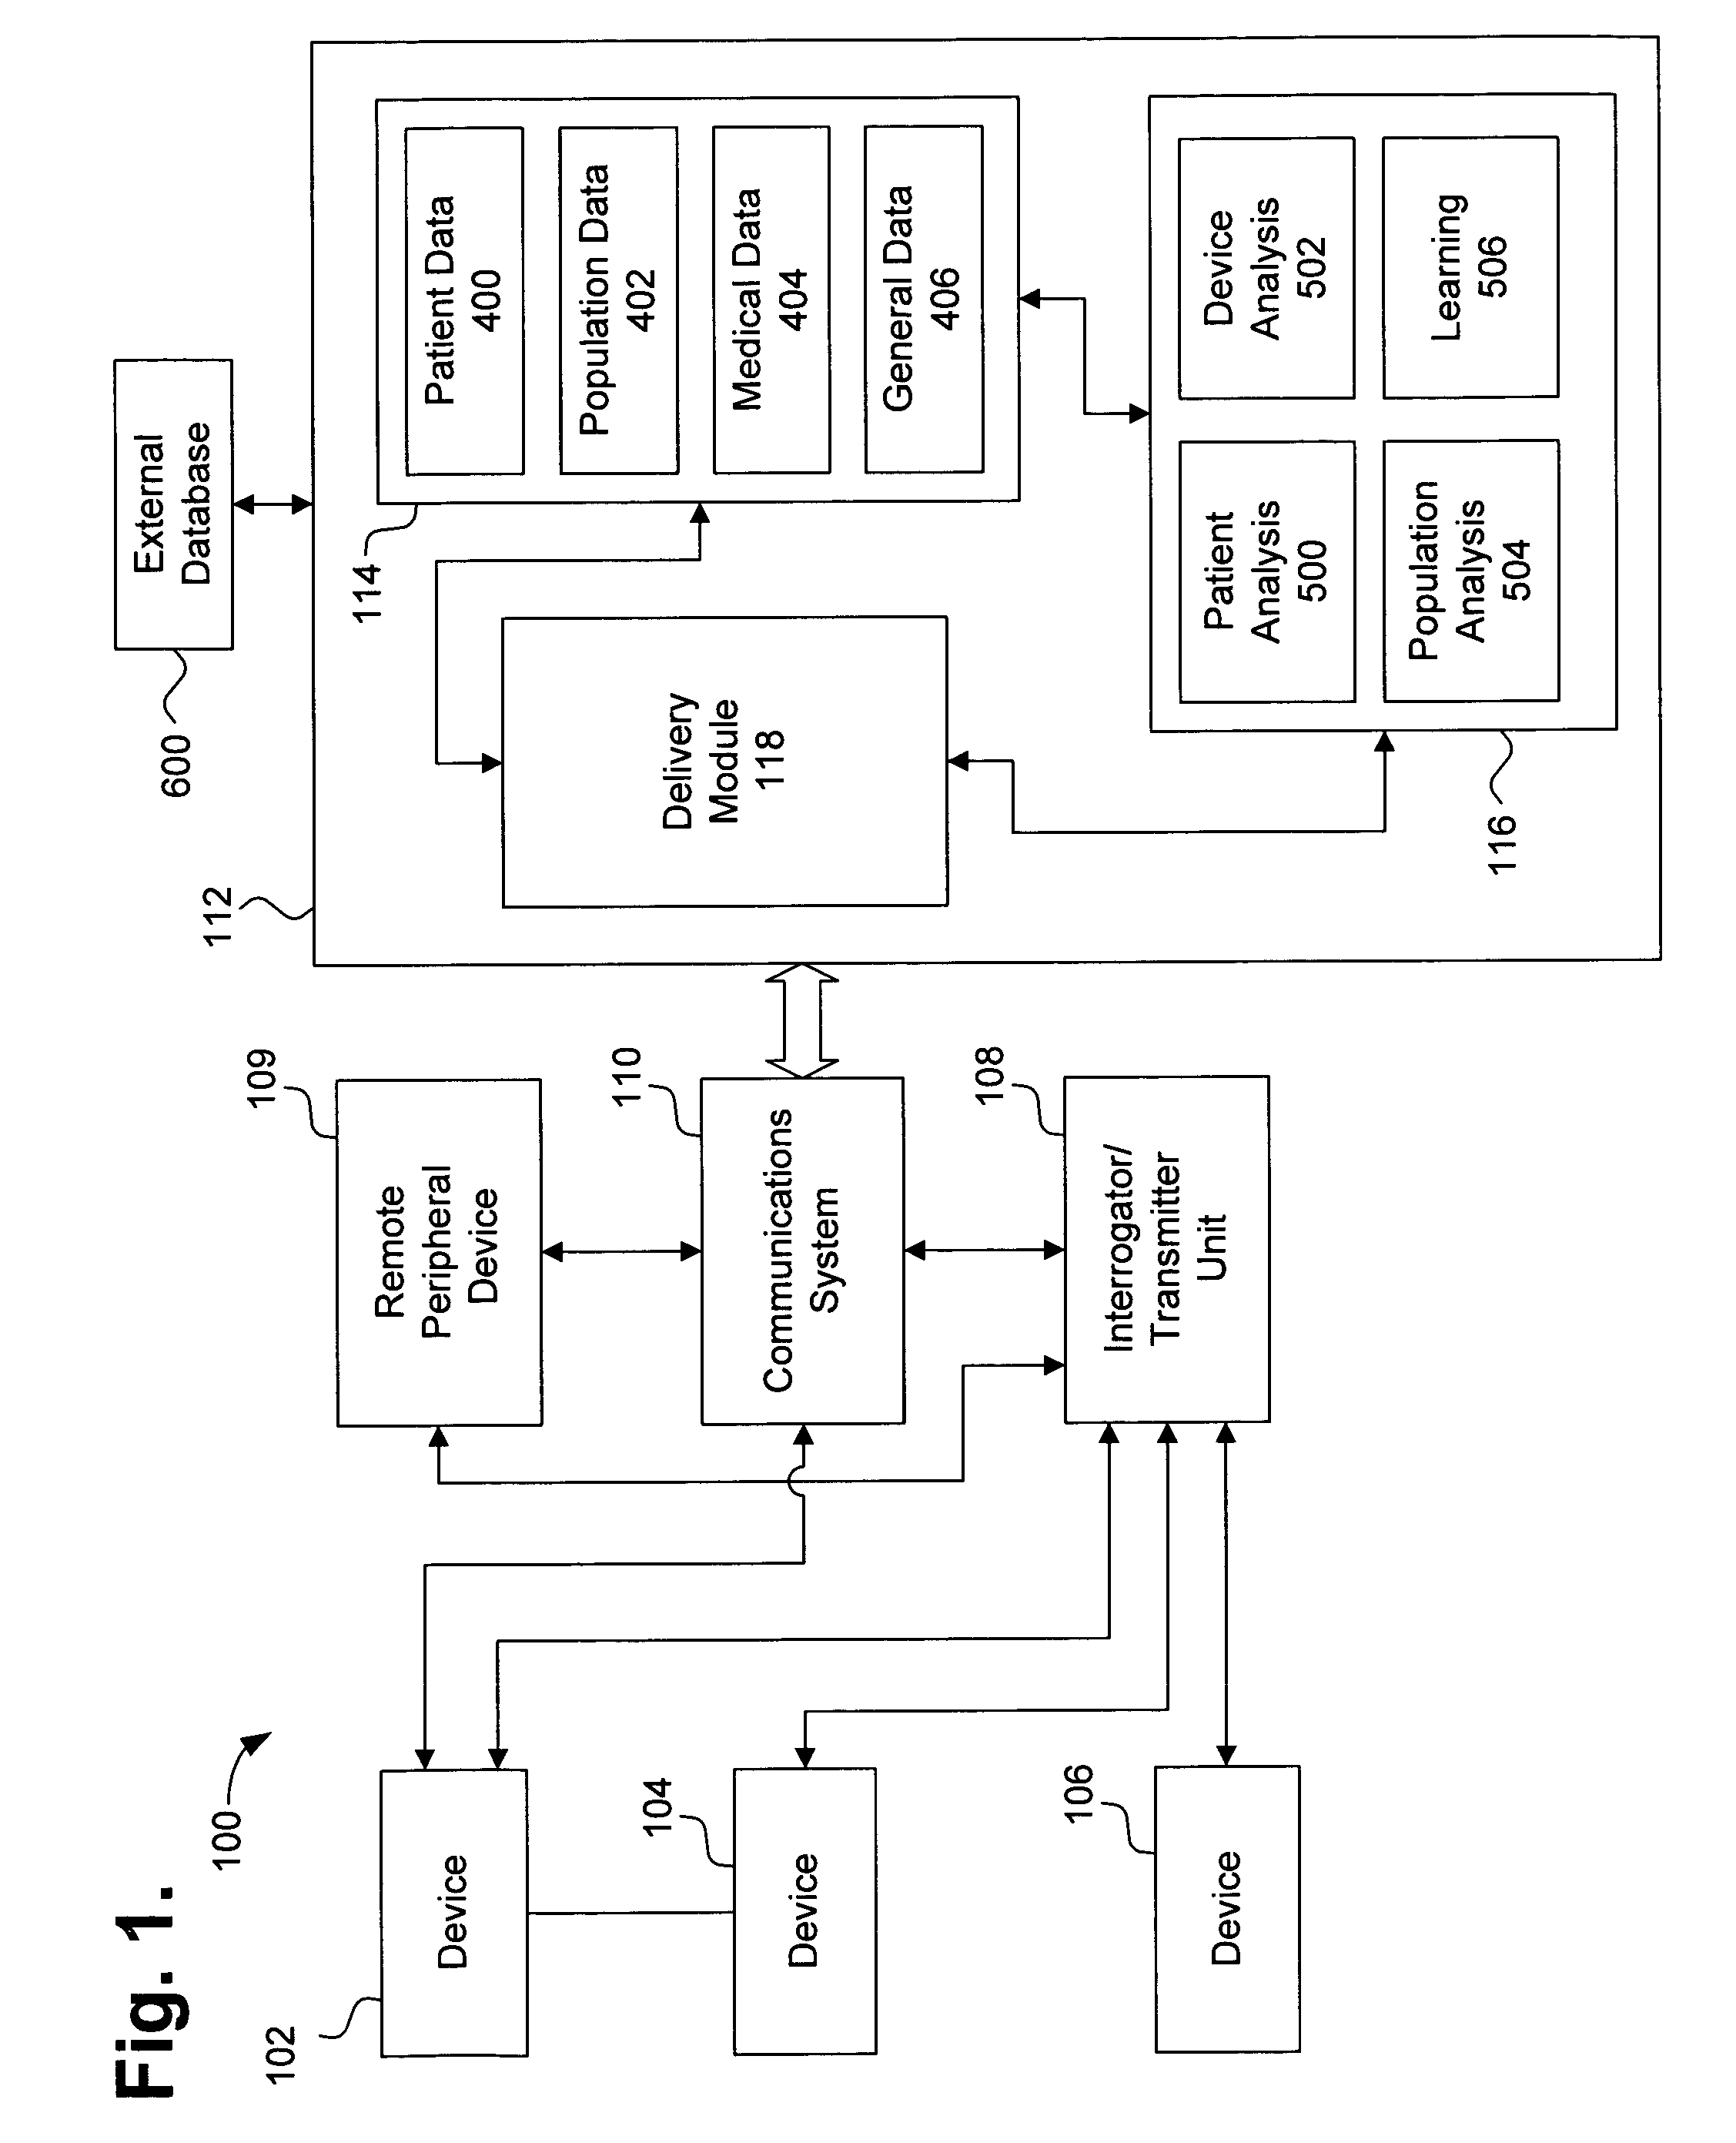 Repeater device for communications with an implantable medical device